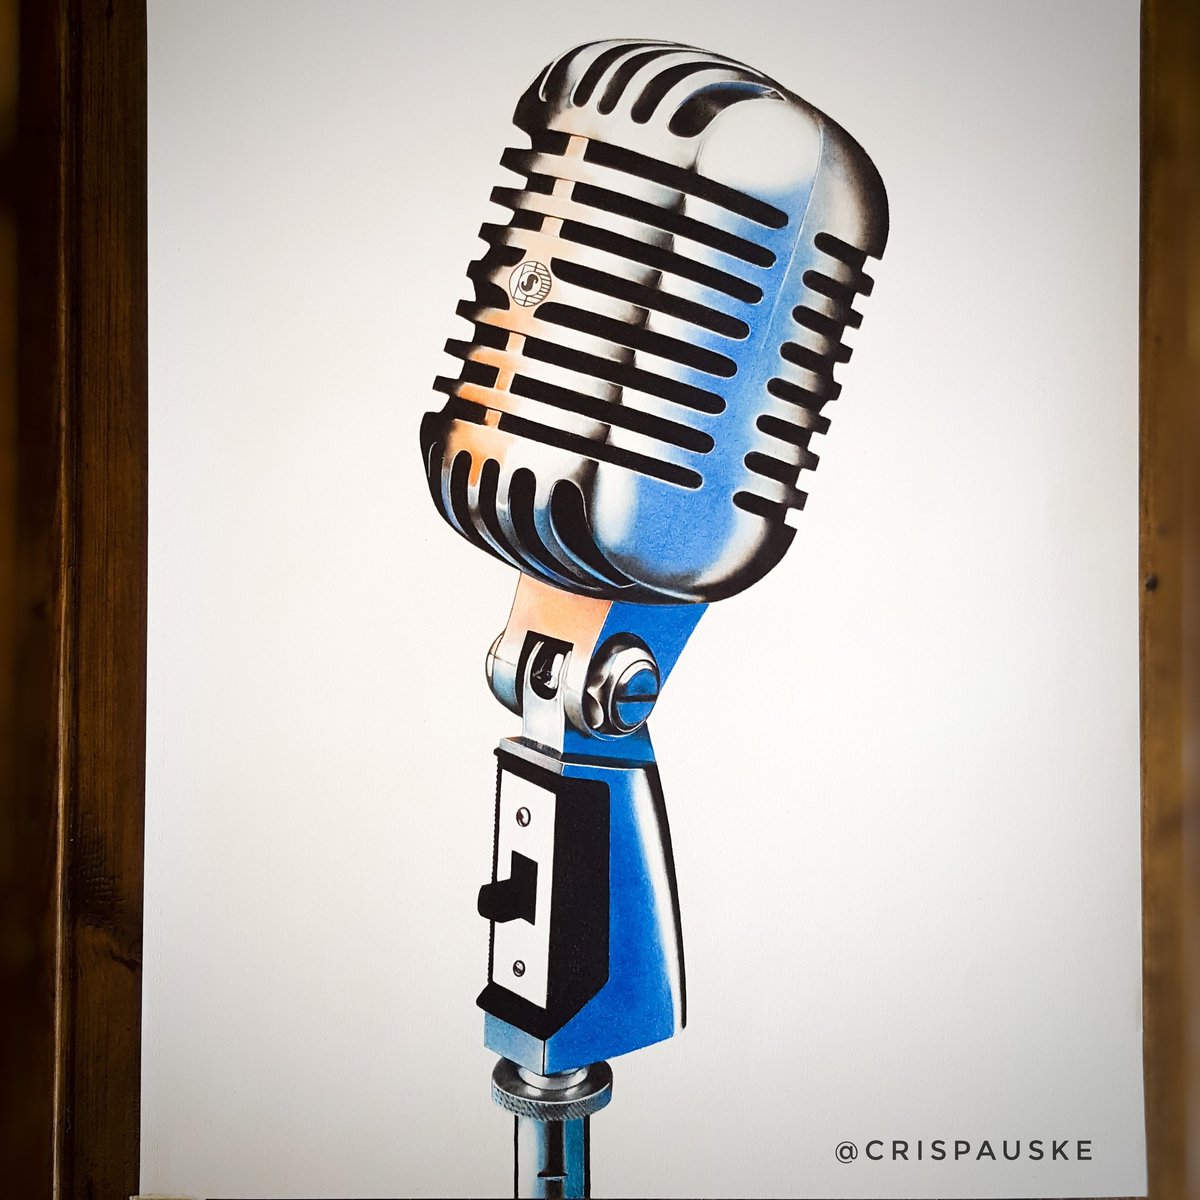 Cris' on Twitter: "Finally, completed this commissioned 'Elvis Presley' Mic Sized 64.8x50cm, A2 I used @FaberCastell @CansonPaper 224gm. To achieve the tone variations and blending, I used Cotton buds. #